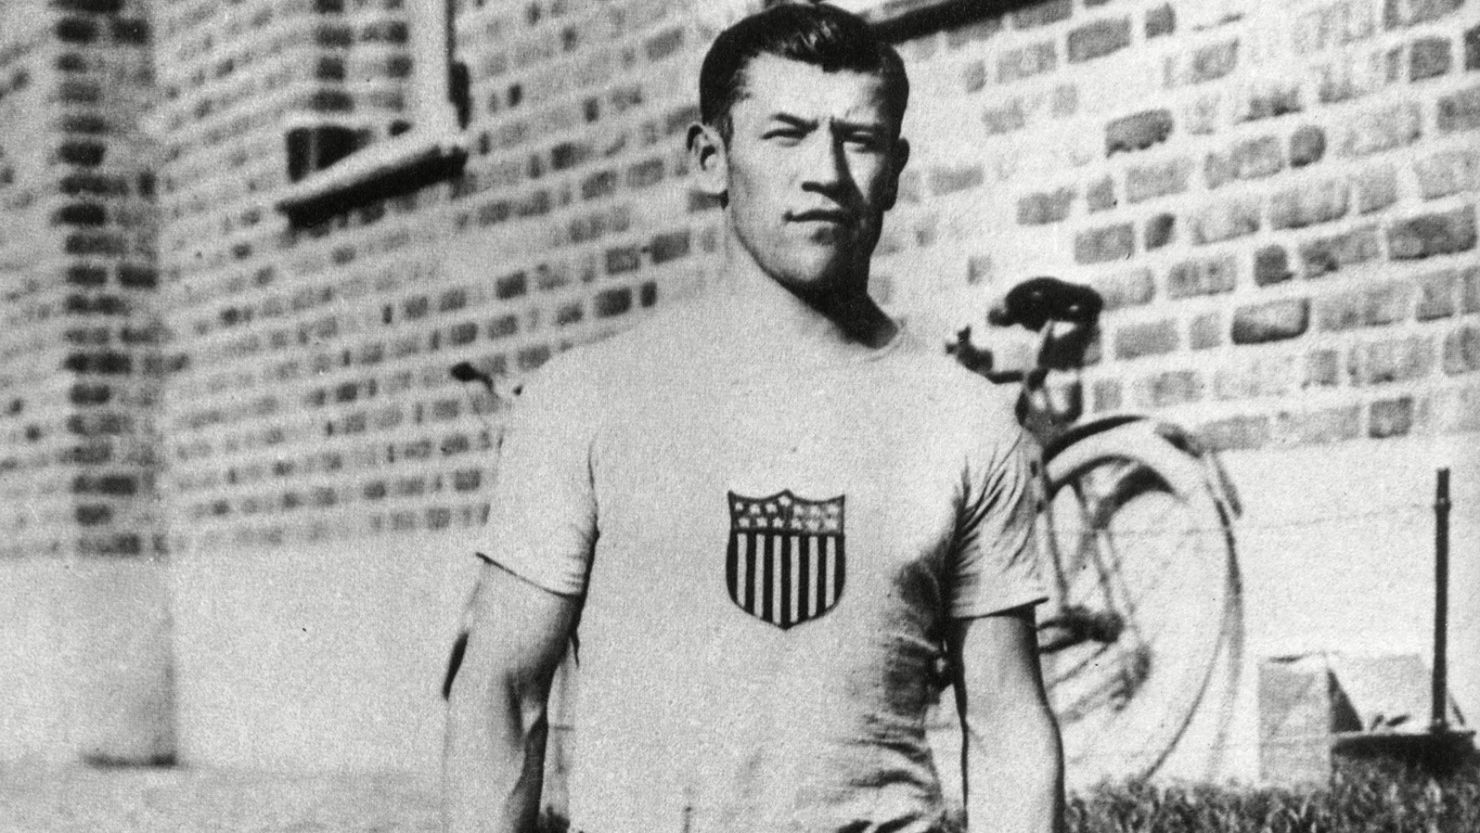 The IOC will reinstate Jim Thorpe as the sole Olympic champion in the decathlon and pentathlon of the 1912 Olympic Games in Stockholm.